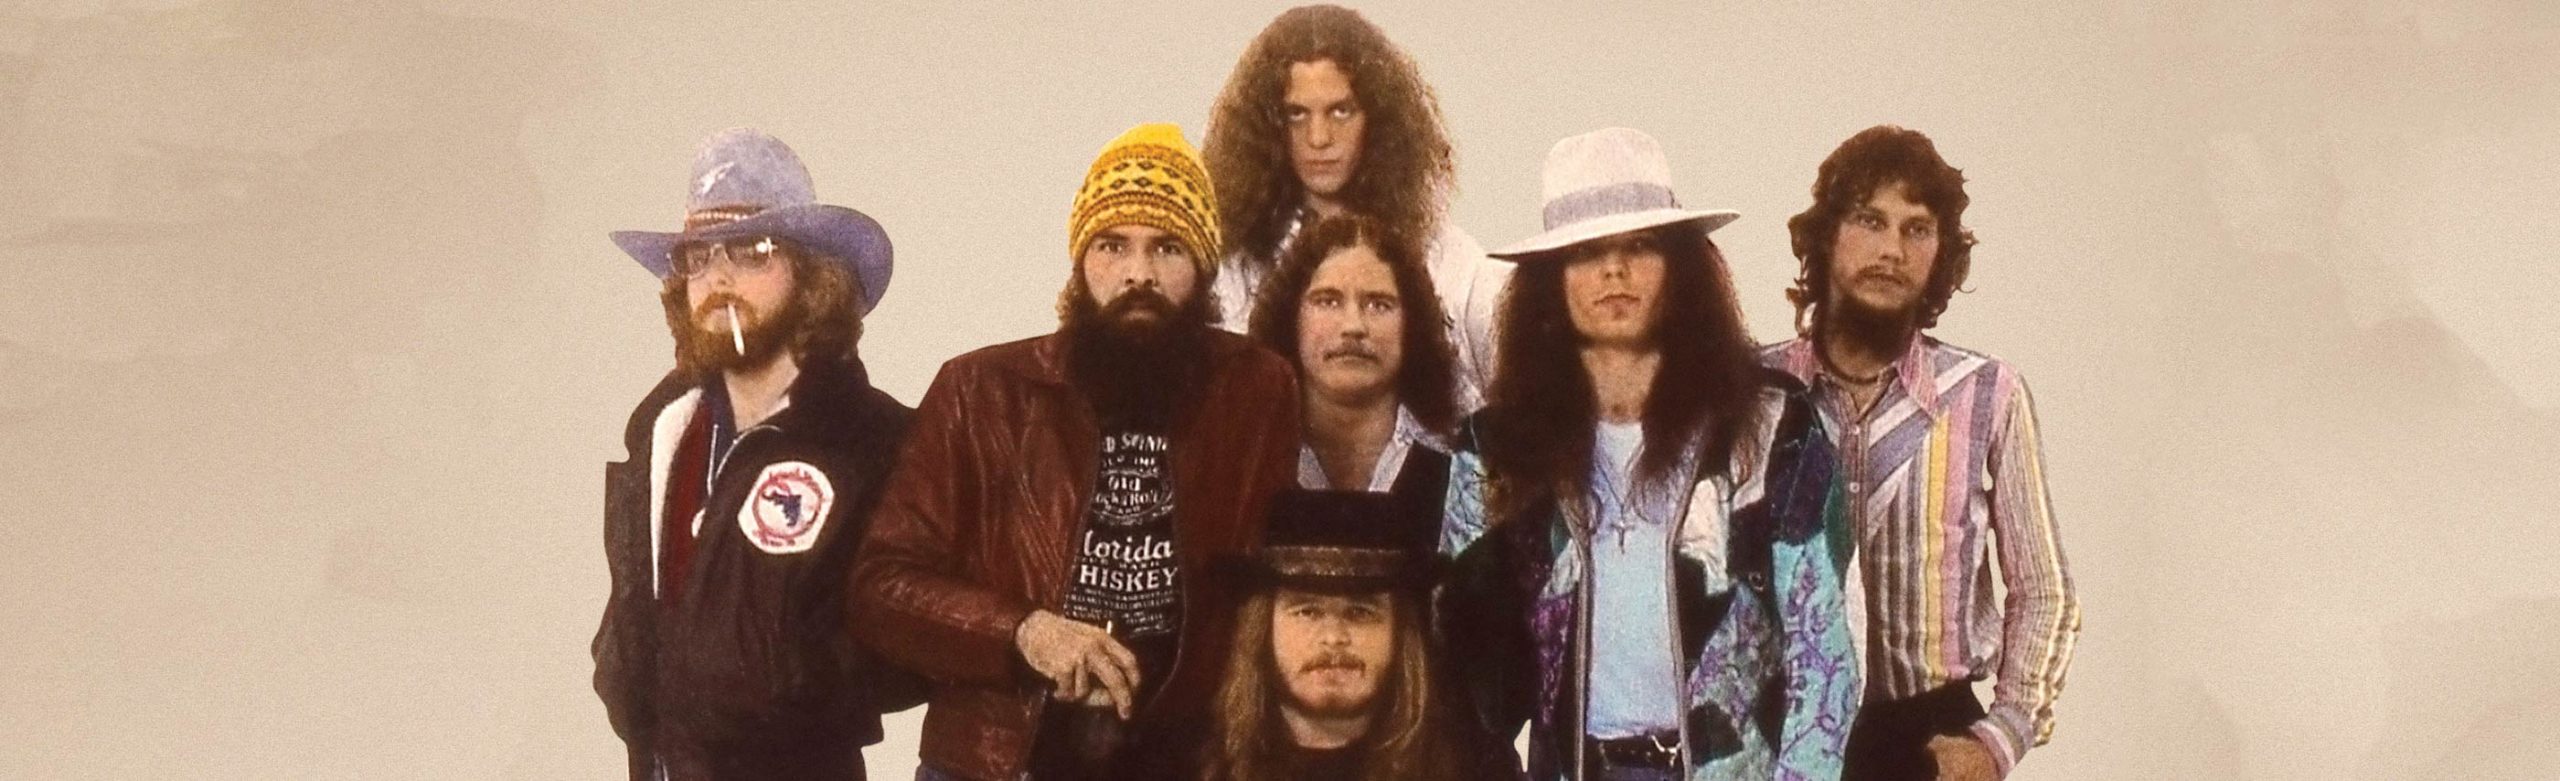 JUST ANNOUNCED: Free Screening of Lynyrd Skynyrd Film on Father’s Day Image